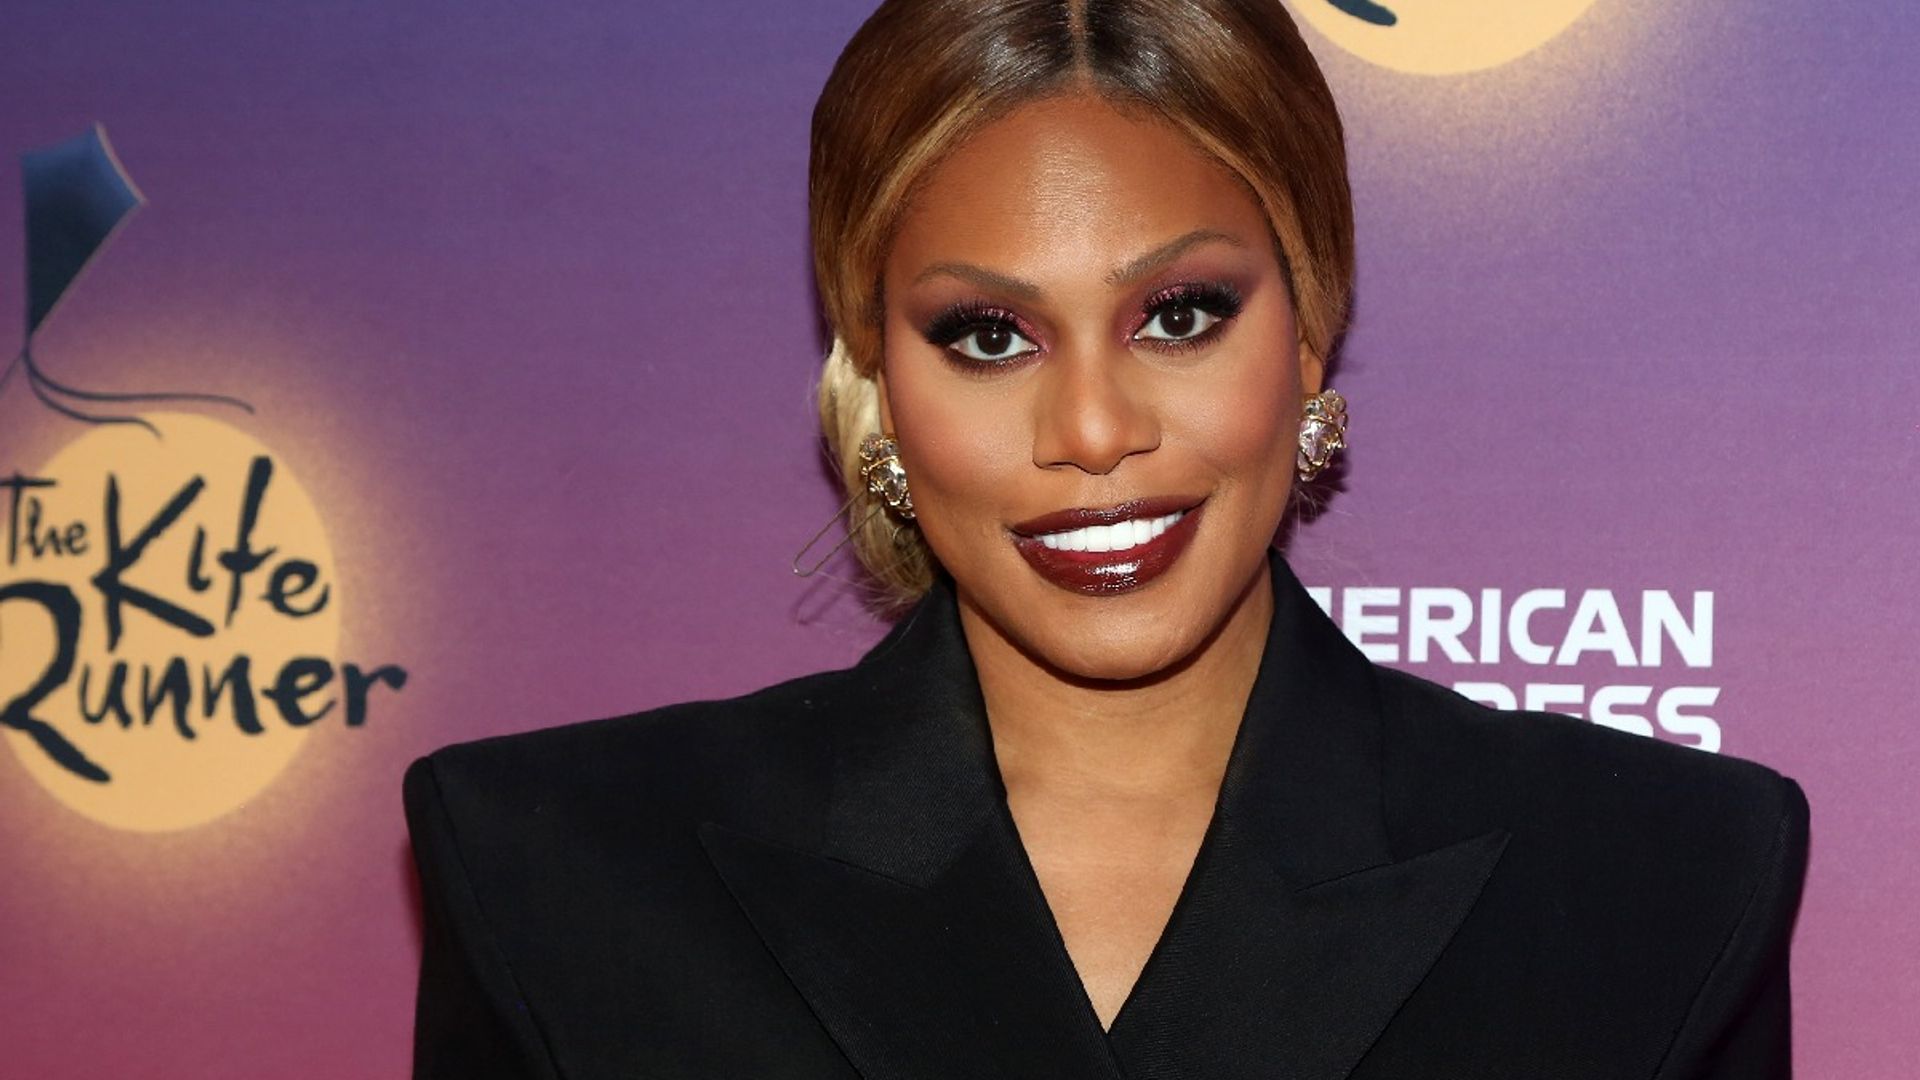 Laverne Cox's twin brother revealed as M Lamar, who shares heartwarming words about his sister